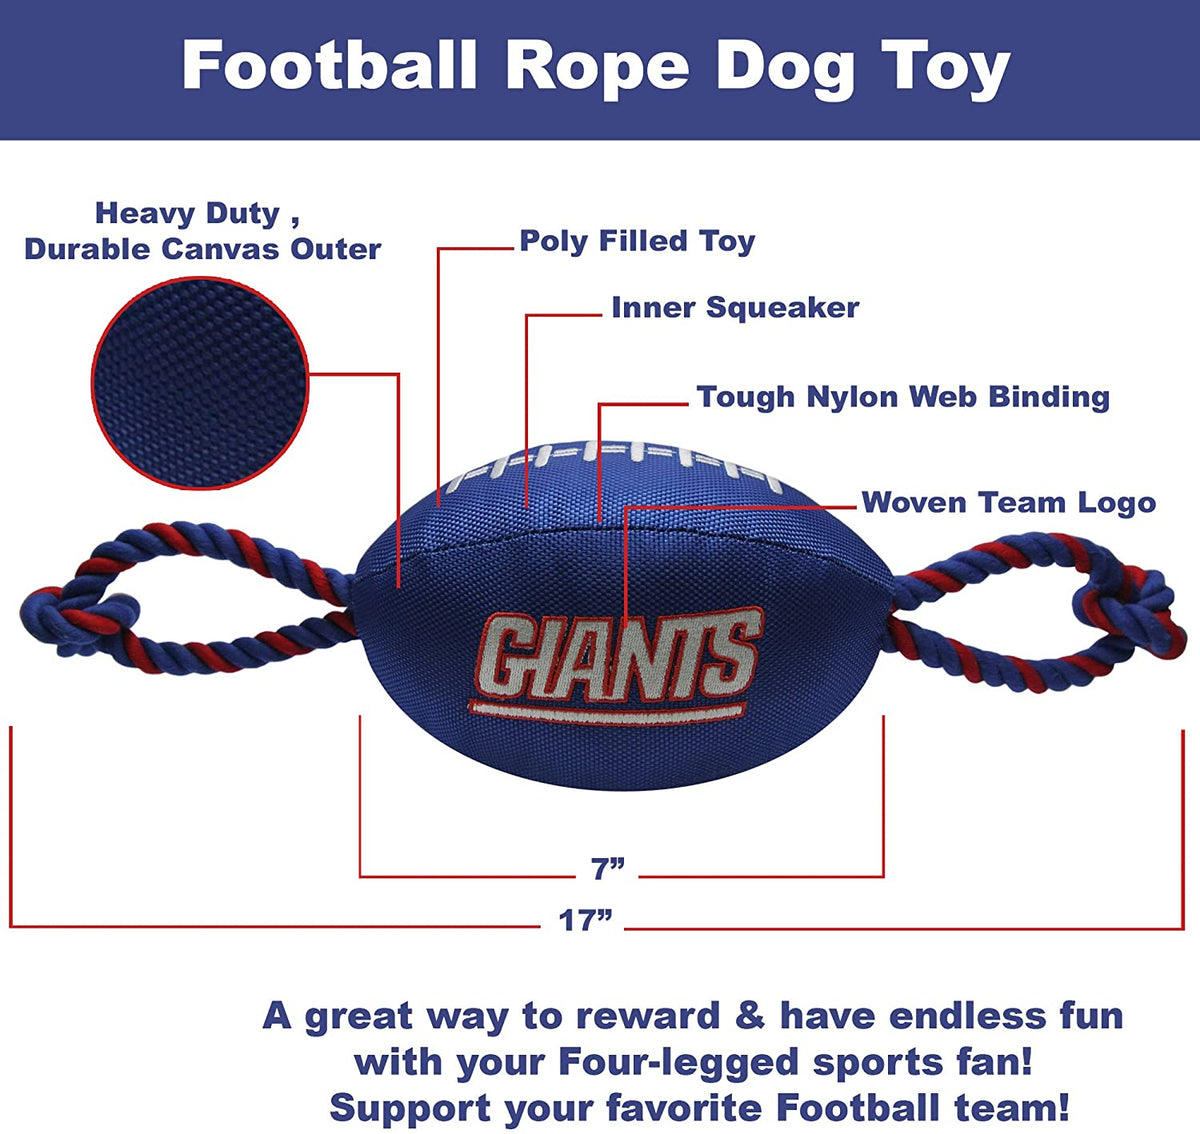 New York Giants Football Rope Toys - 3 Red Rovers